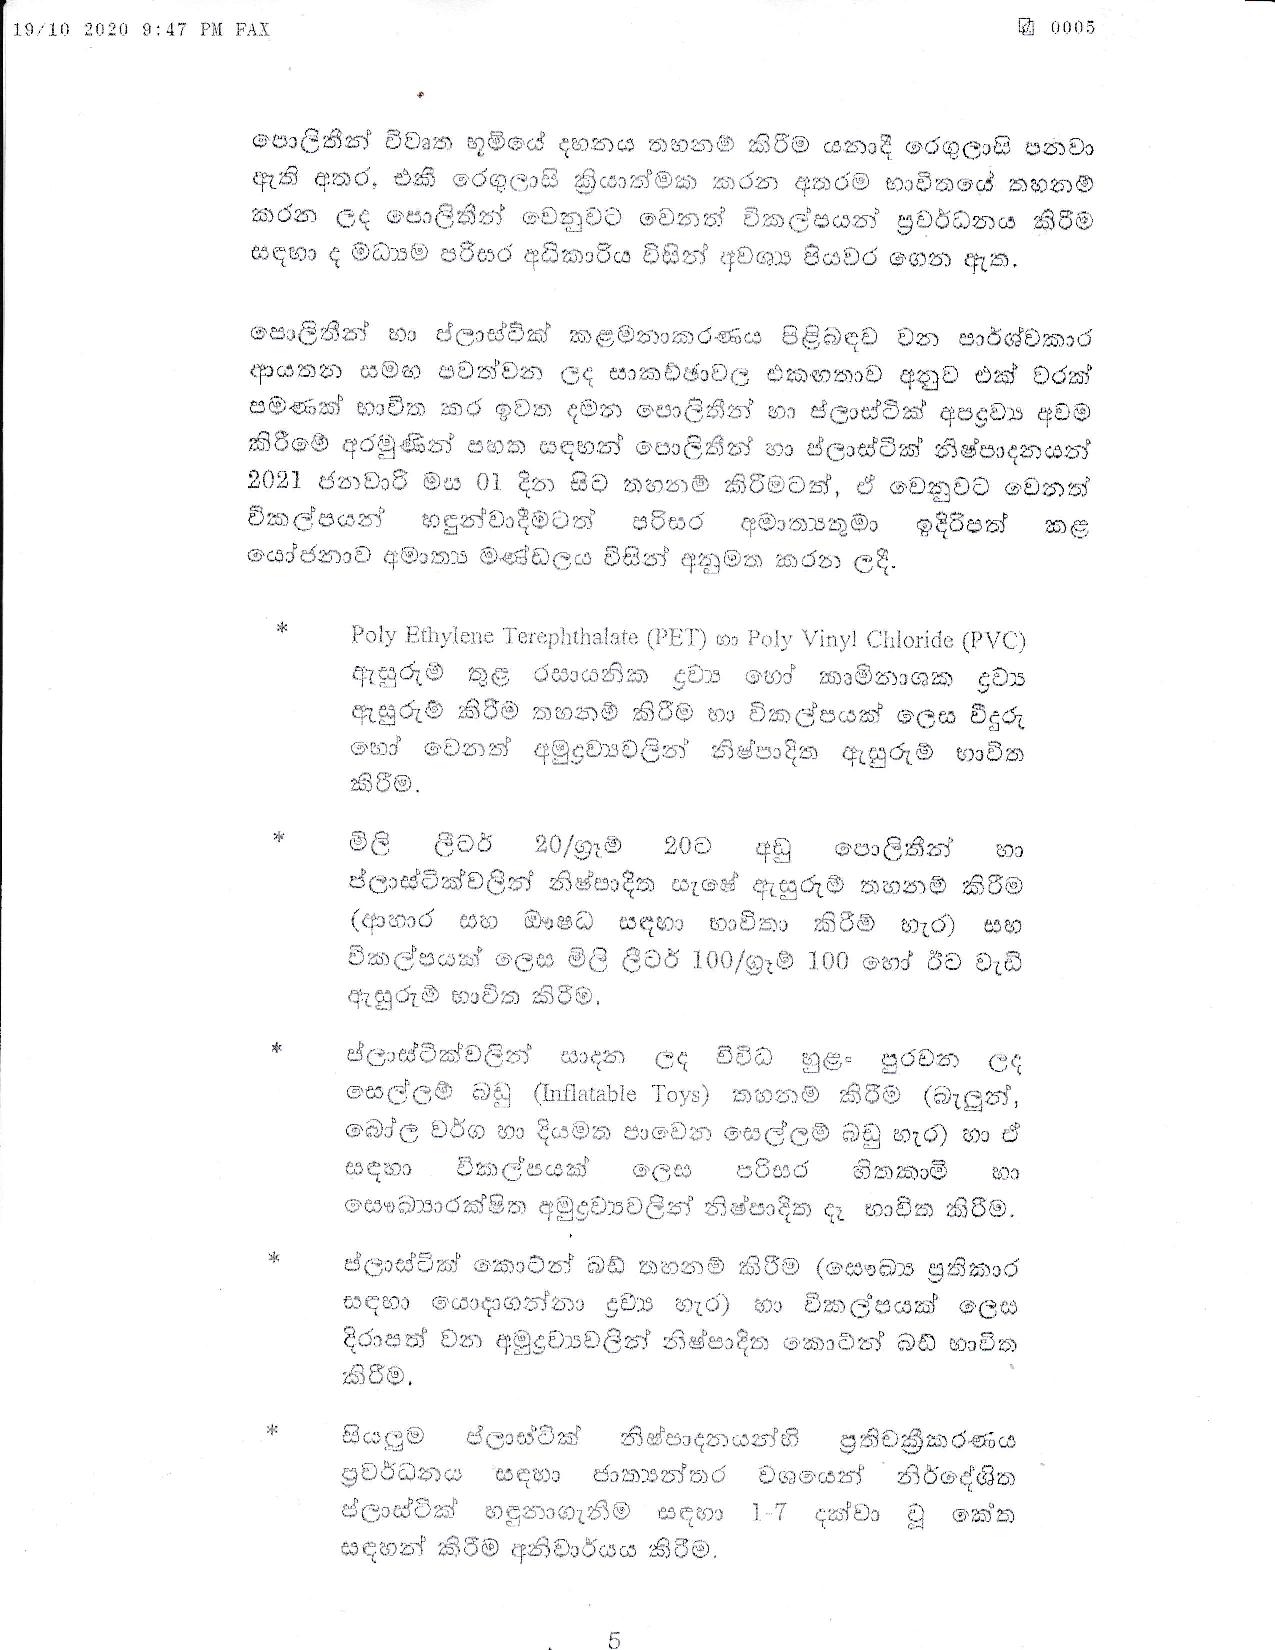 Cabinet Decision on 19.10.2020 page 005